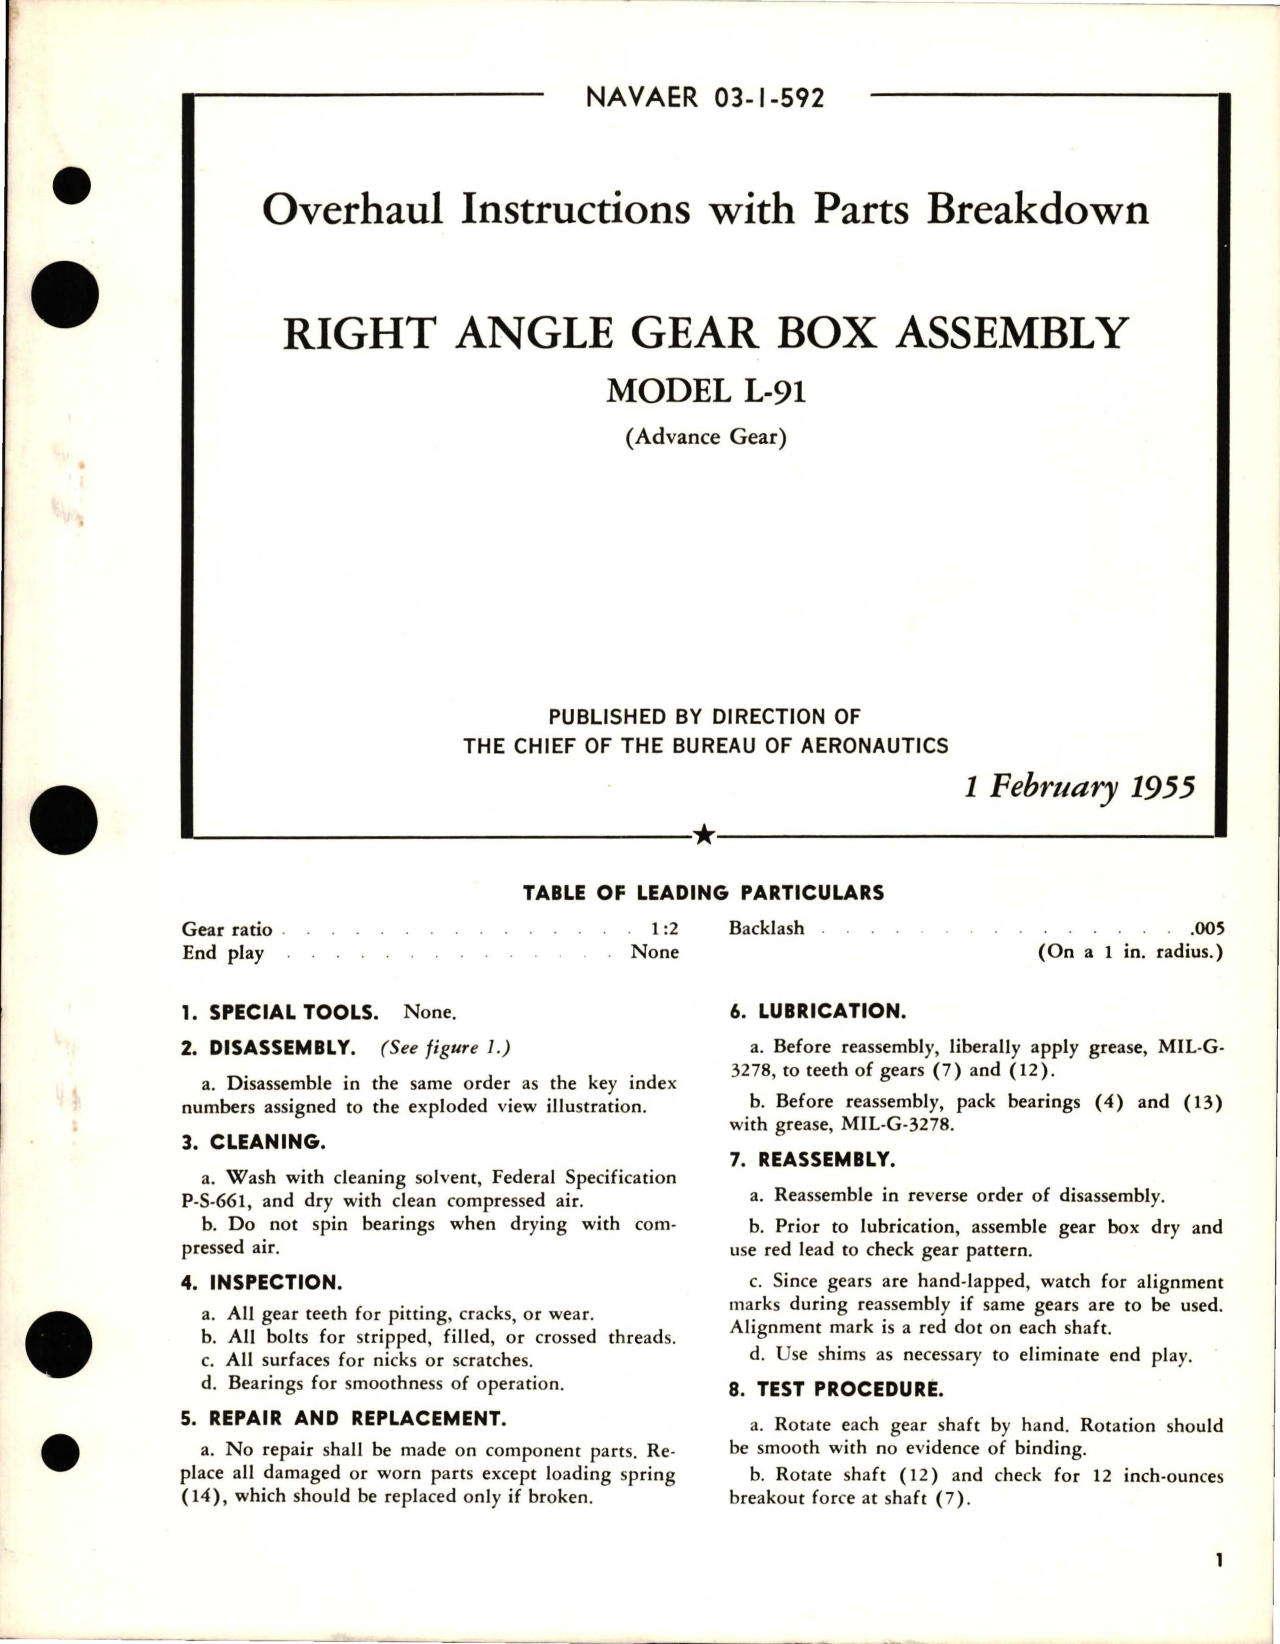 Sample page 1 from AirCorps Library document: Overhaul Instructions with Parts Breakdown for Right Angle Gear Box Assembly - Model L-91 